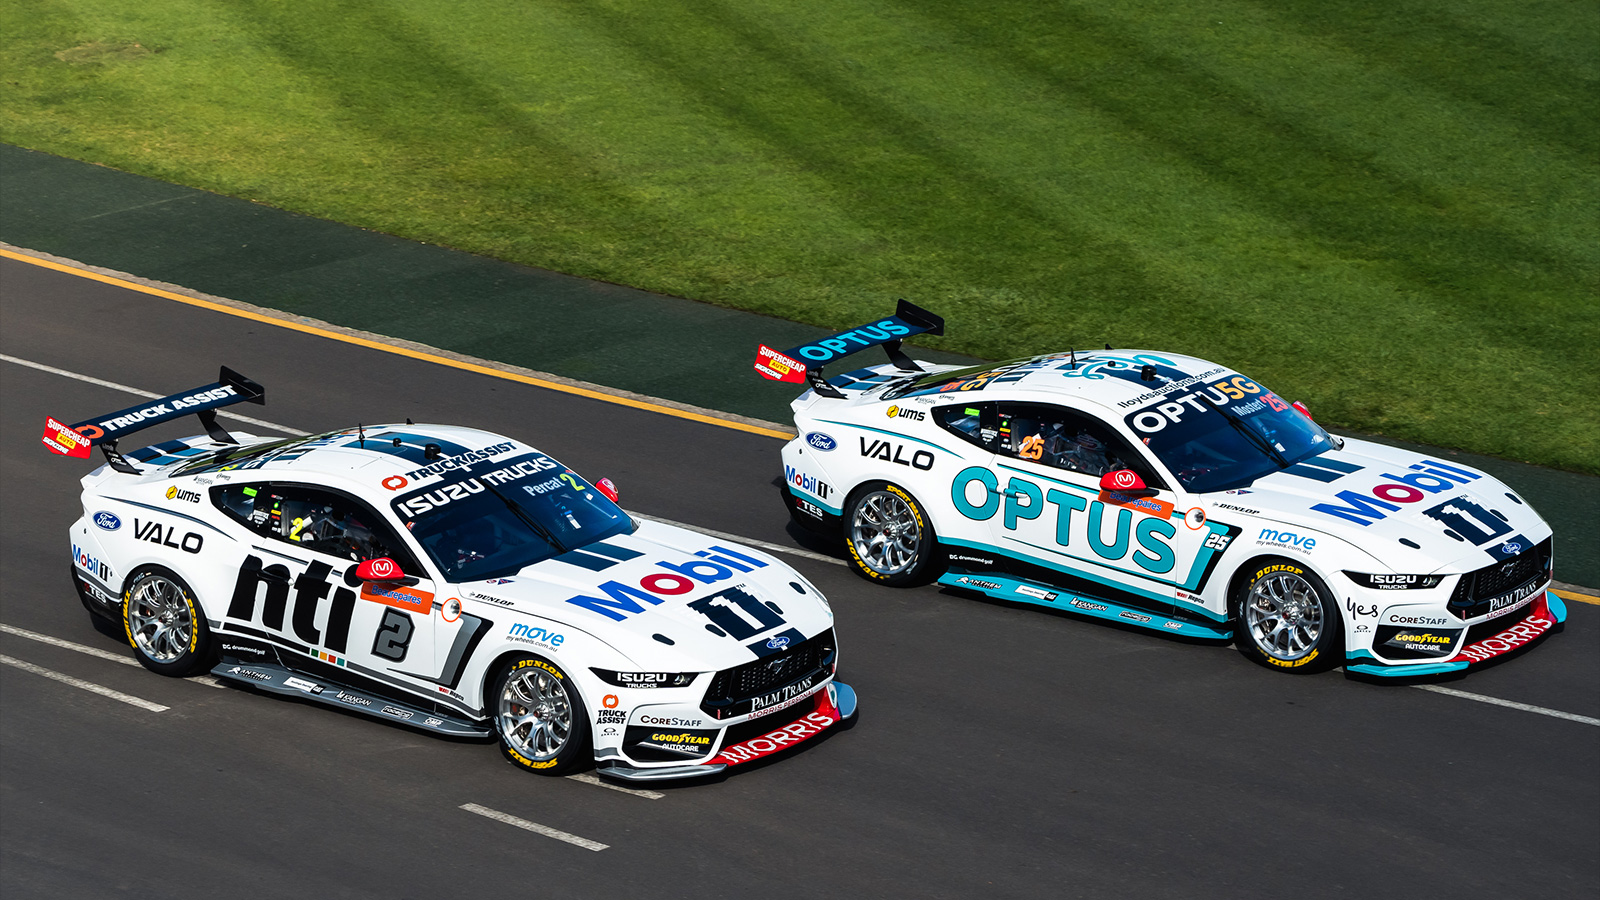 Chaz Mostert and Nick Percat on track at the Australian Grand Prix.